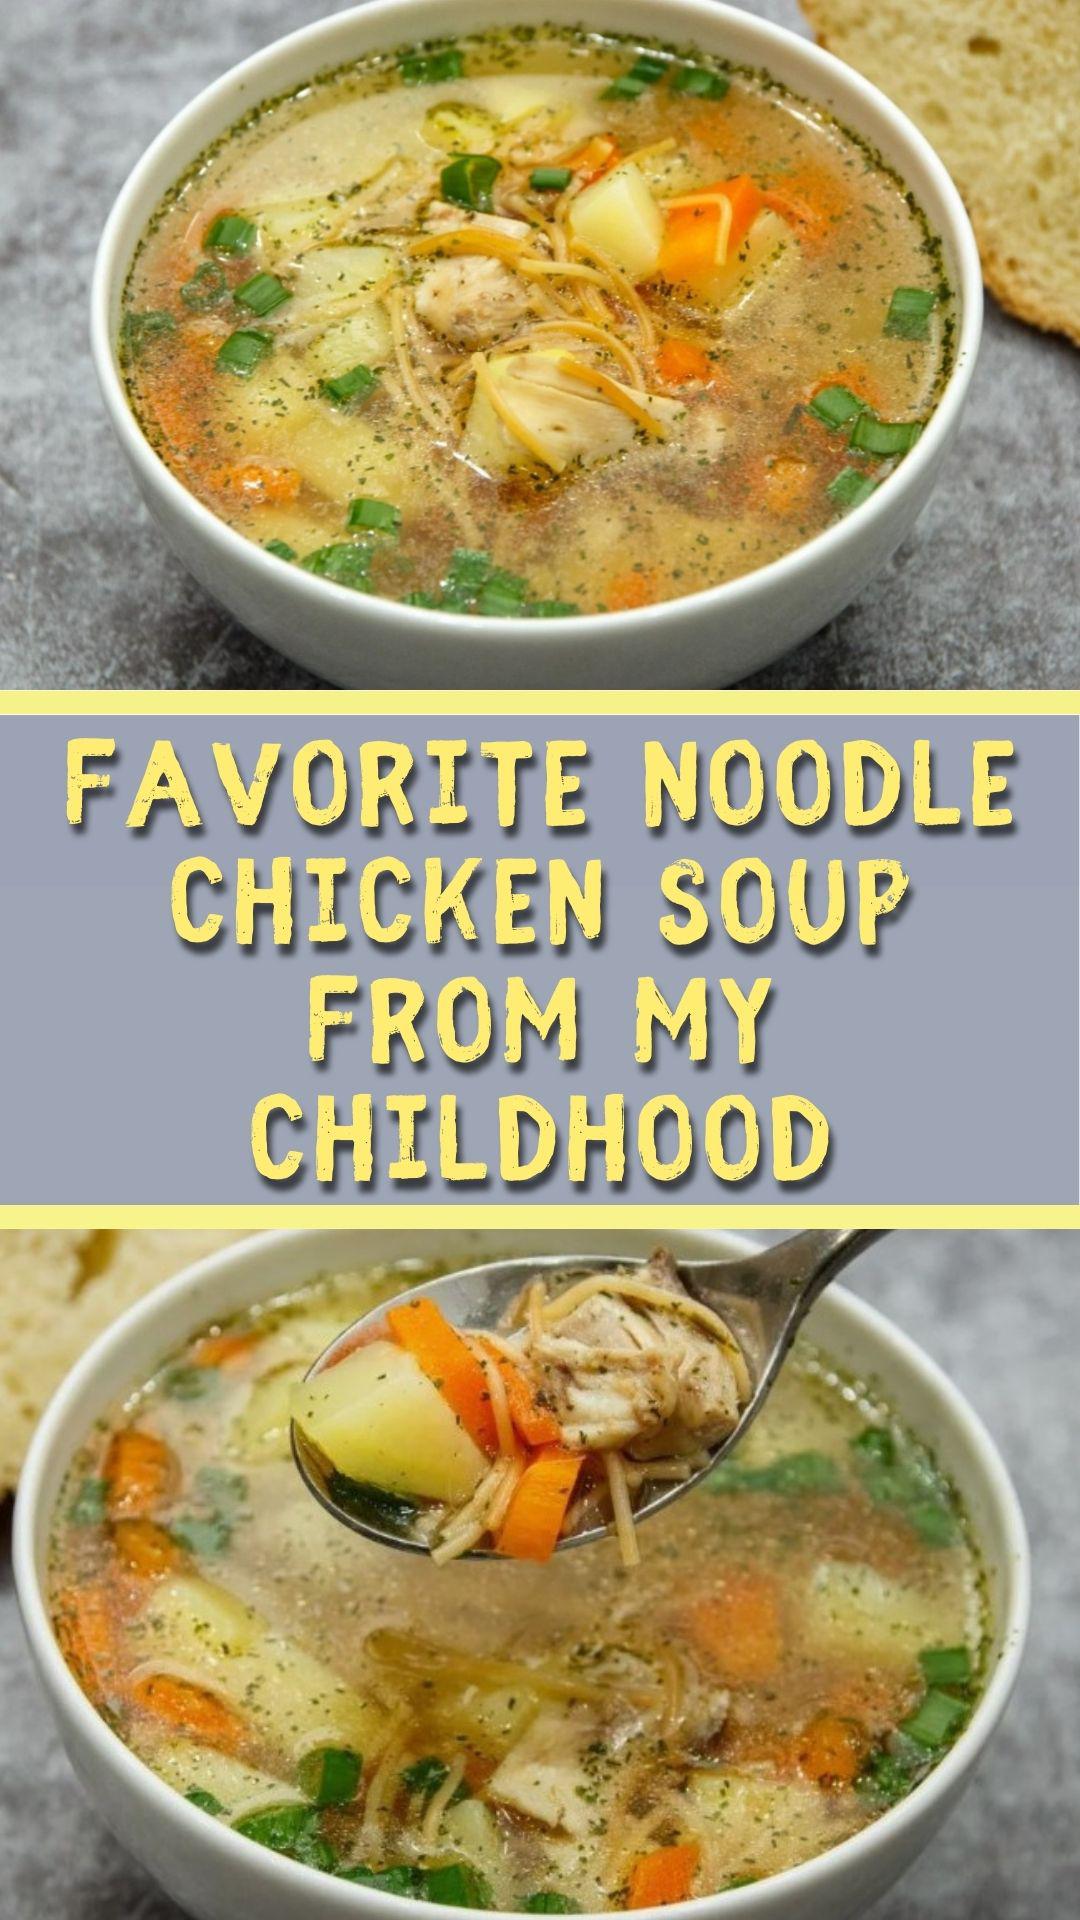 Favorite noodle chicken soup from my childhood